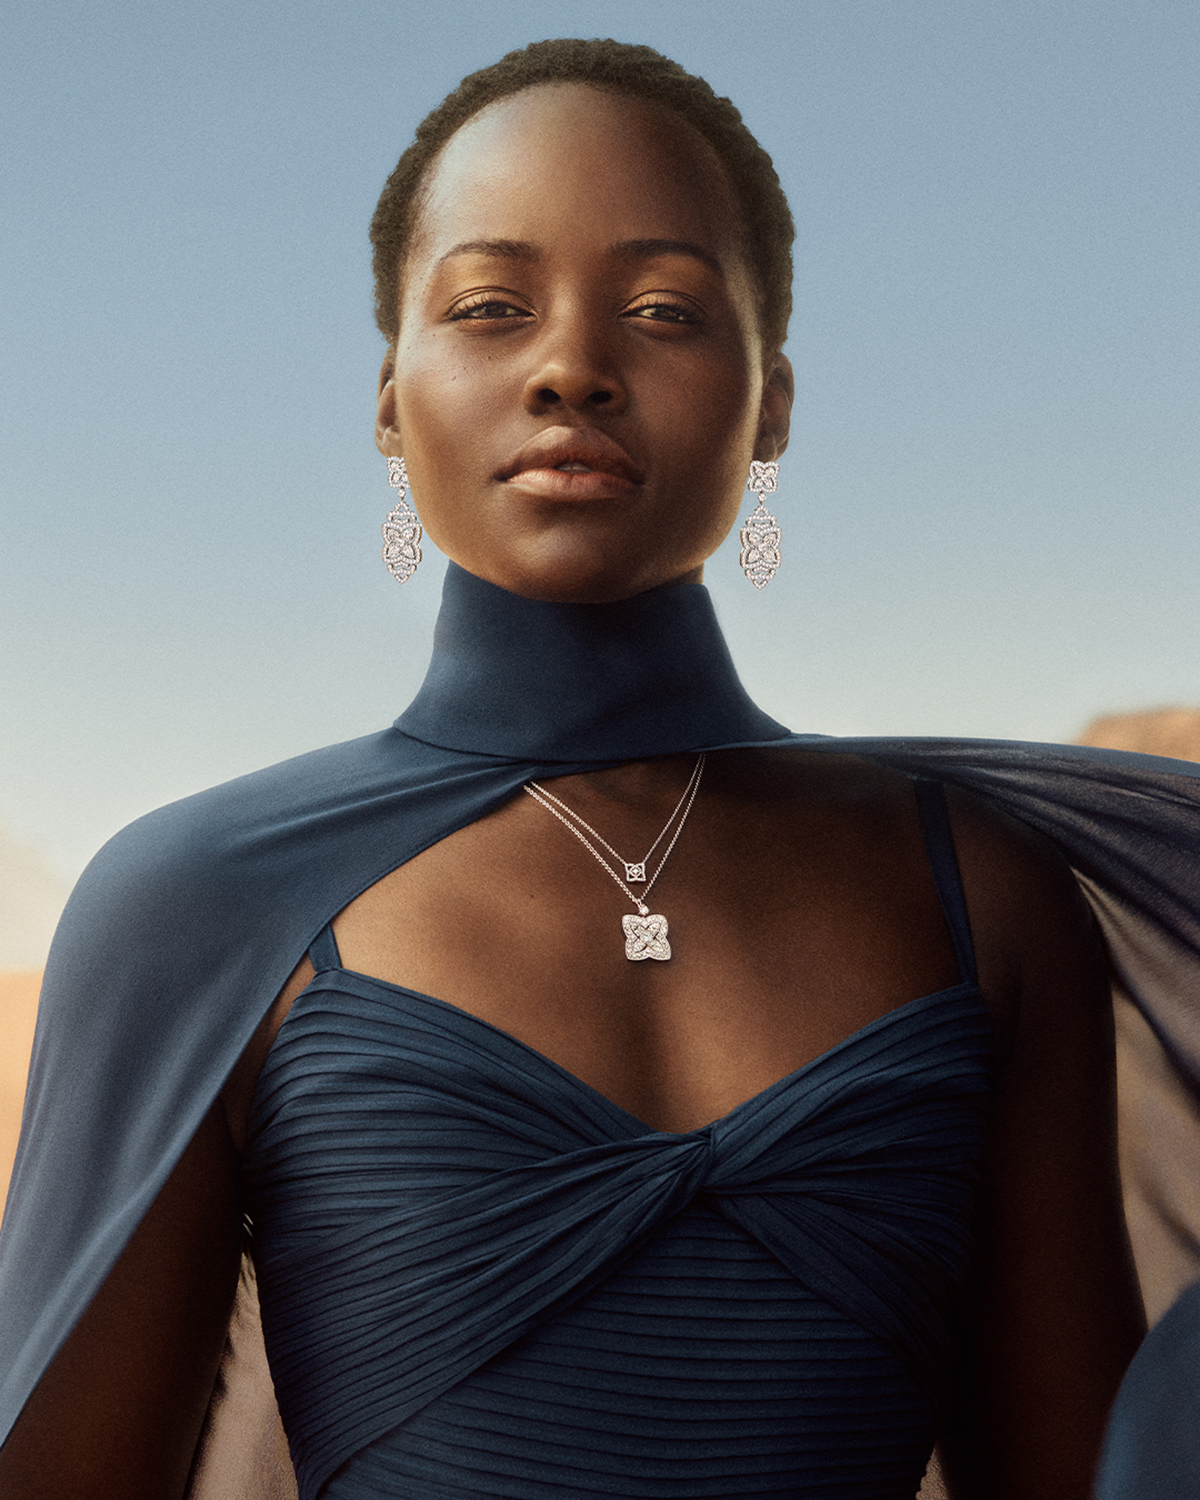 De Beers Group launches new fashion jewellery brand with